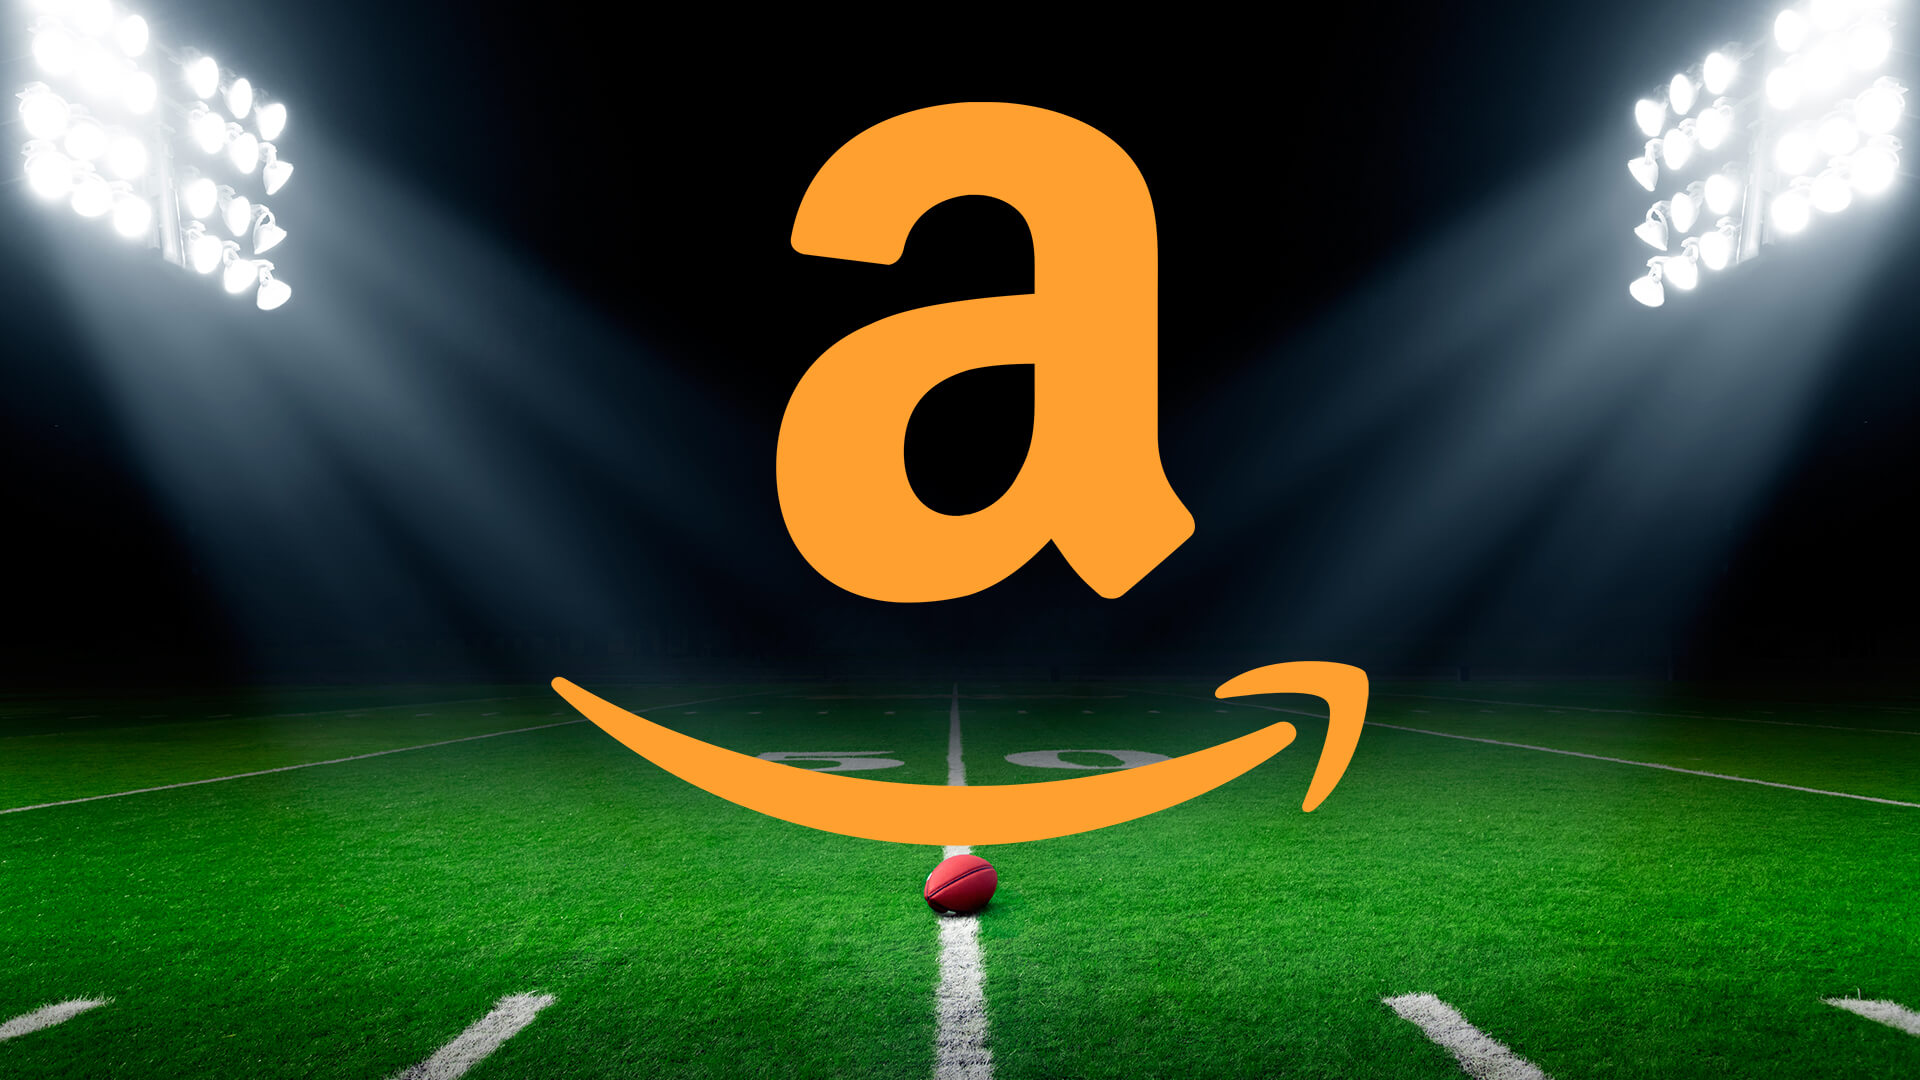 TV viewership for NFL games falls further, but Amazon disruption lies ahead